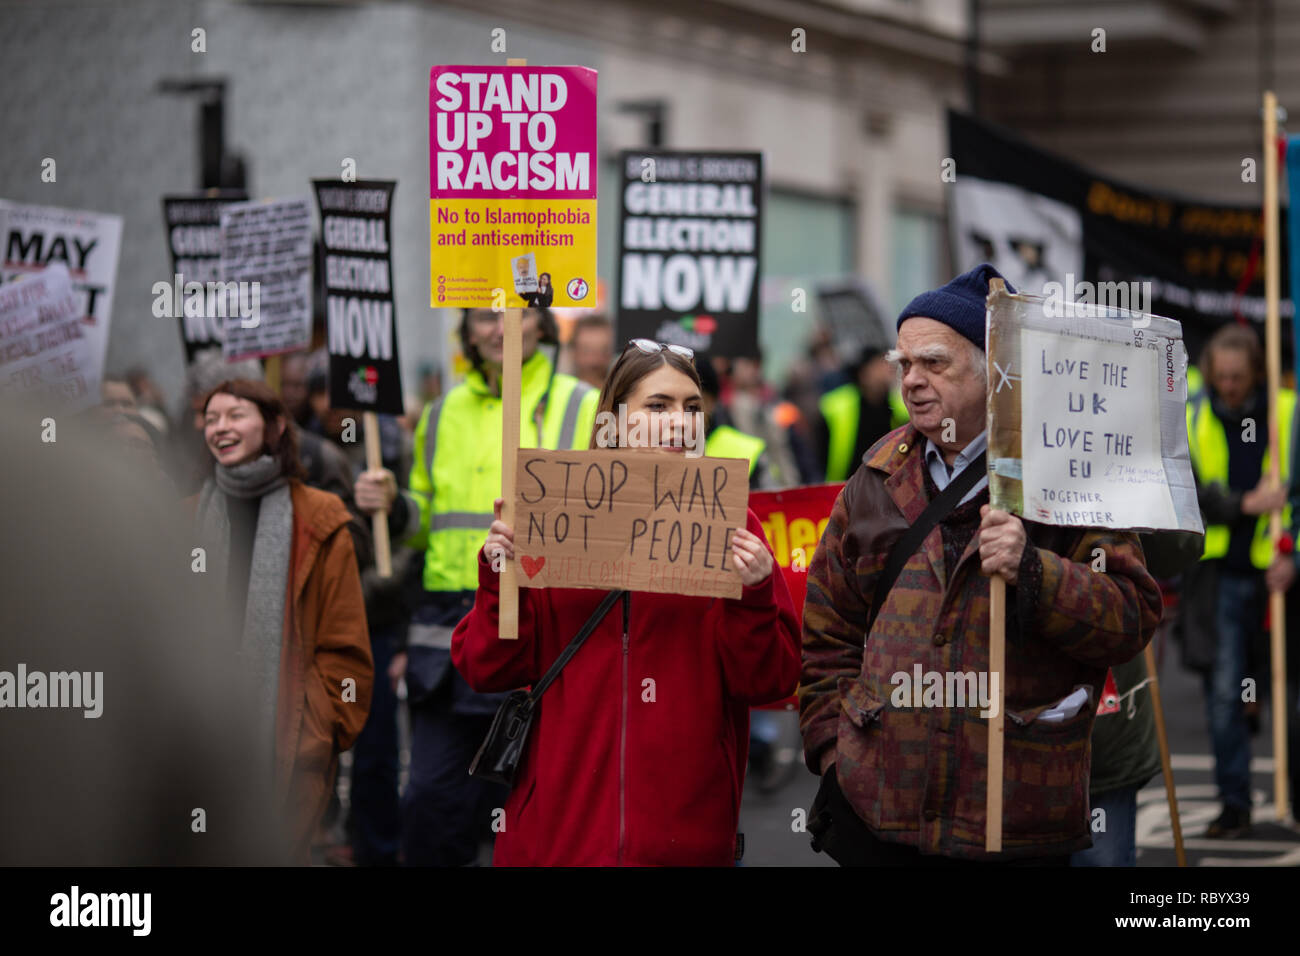 Demonstrators seen with placards at the People's Assembly rally. Thousands rallied in central London for the 'People’s Assembly against Austerity' inspired by the French 'Yellow Vest' protests bringing attention to austerity programs that have hit the poor hard. Stock Photo